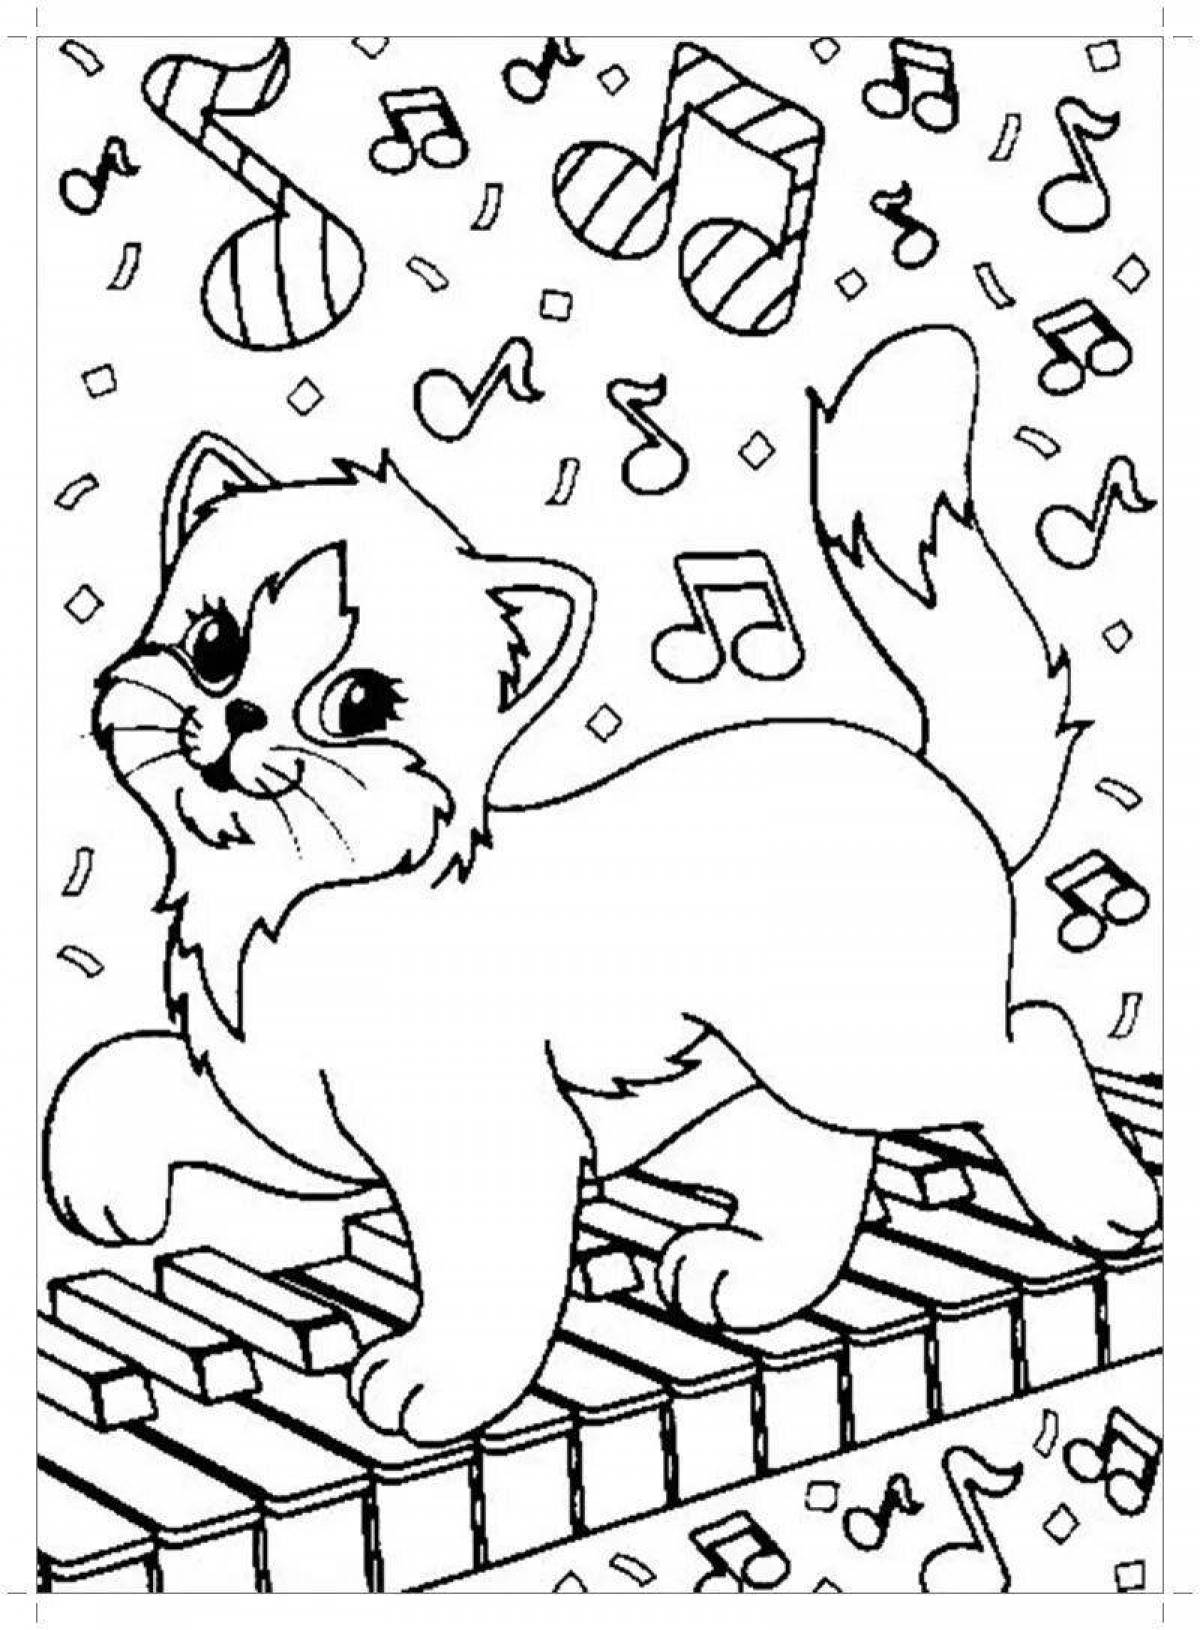 Fun coloring cat for children 5-6 years old